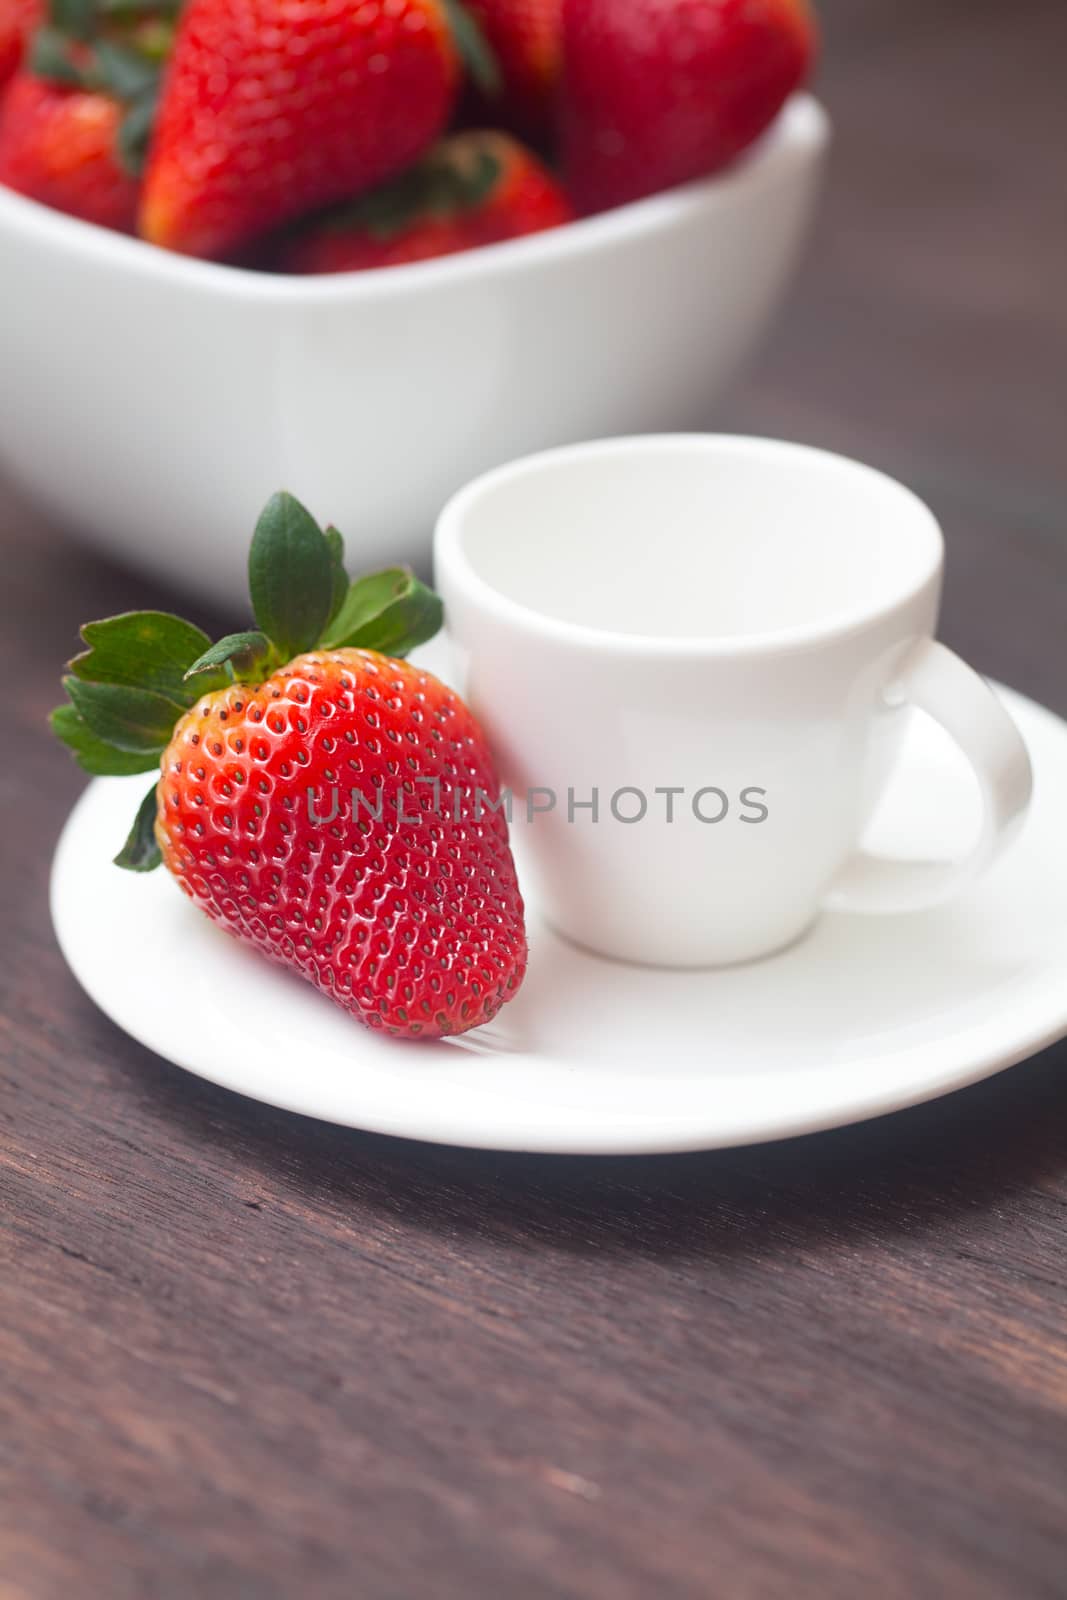 red juicy strawberry in a bowl and cup on a wooden surface by jannyjus